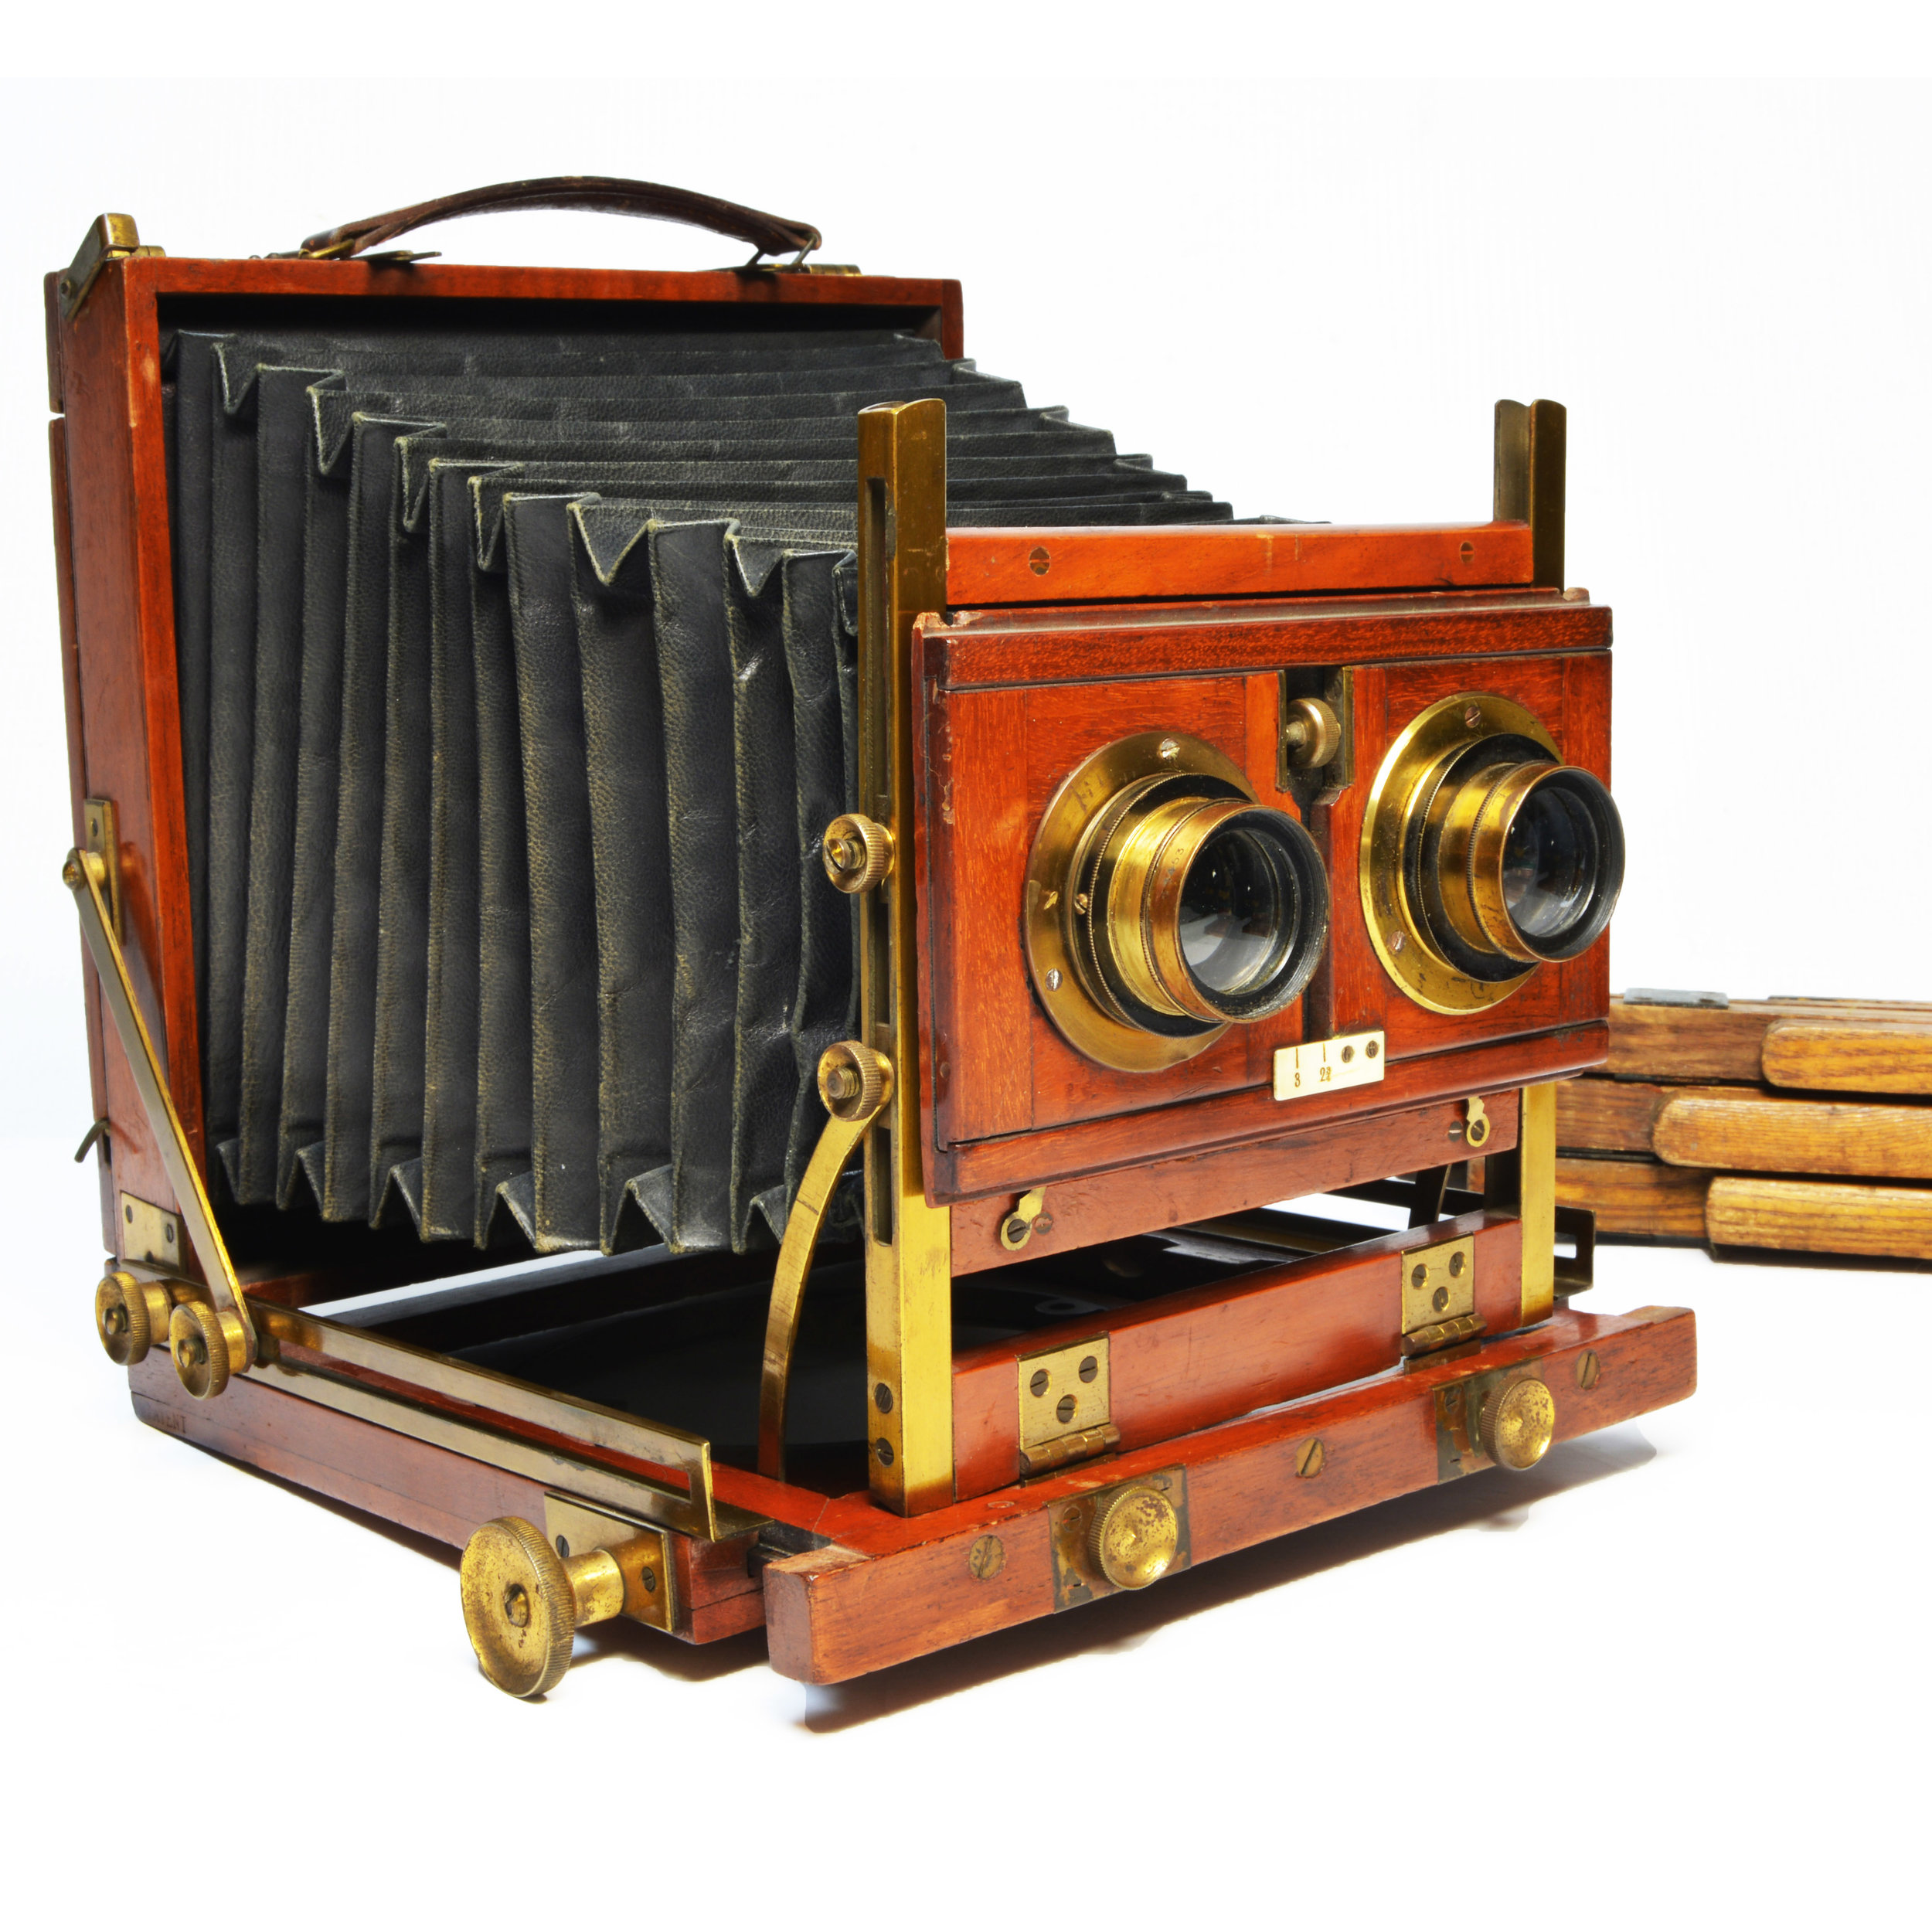 Unnamed stereo camera